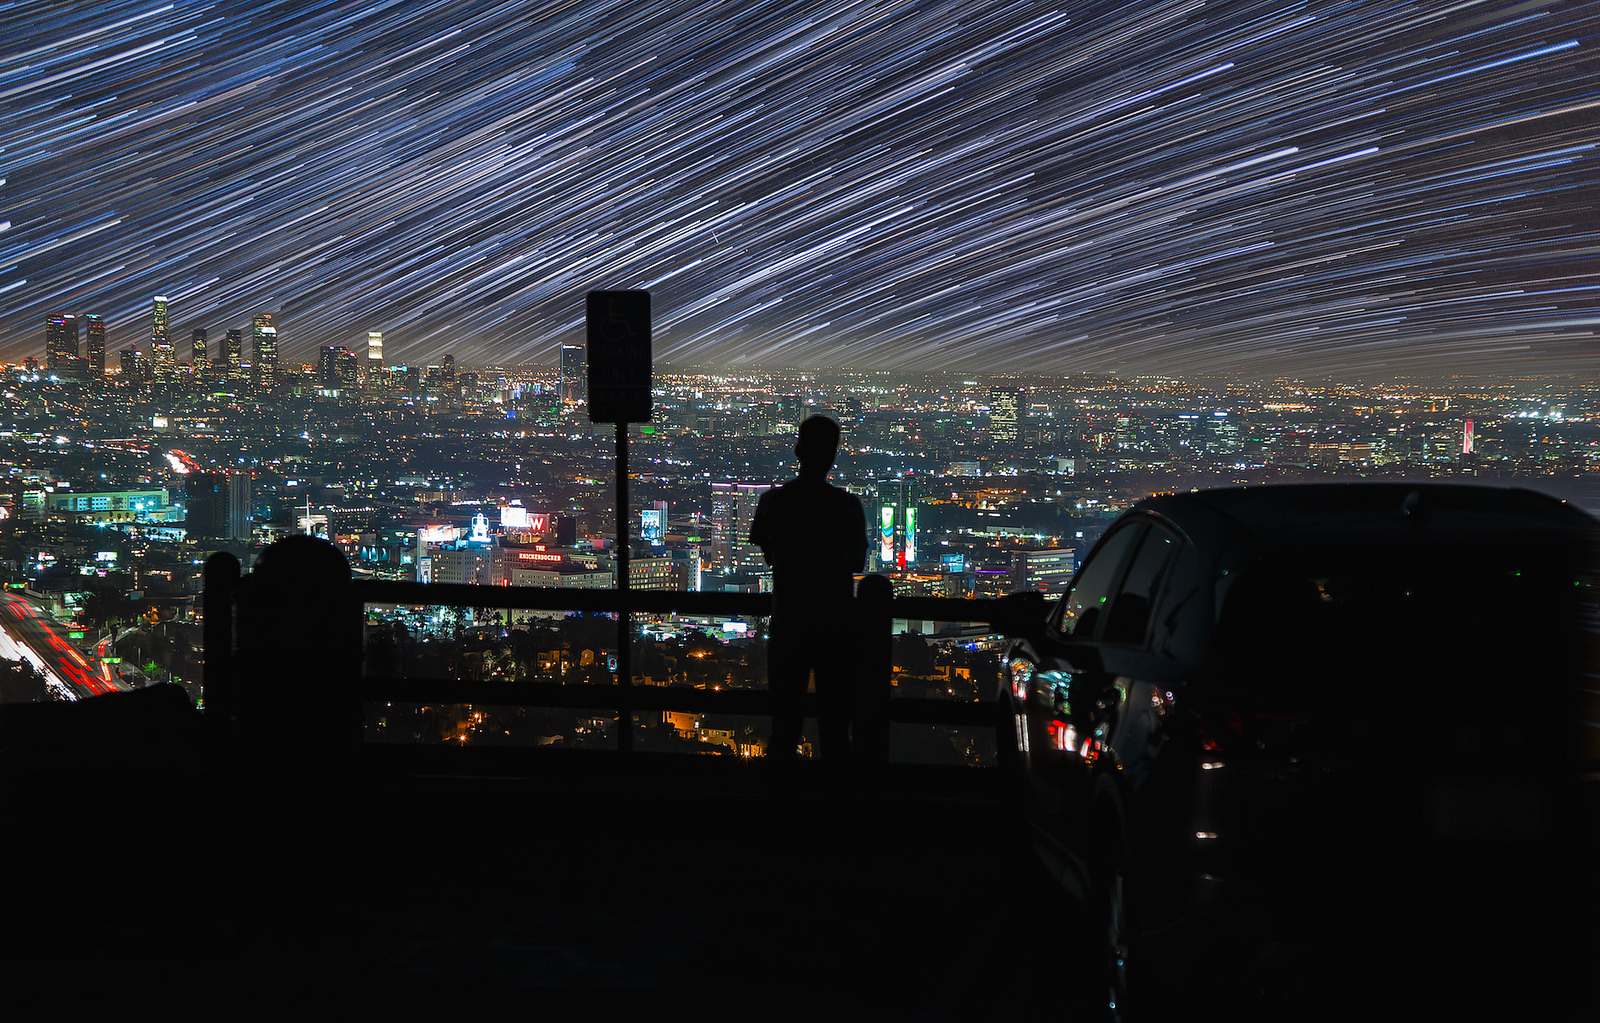 These Images Show The Night Sky That Hides Behind Our City Lights